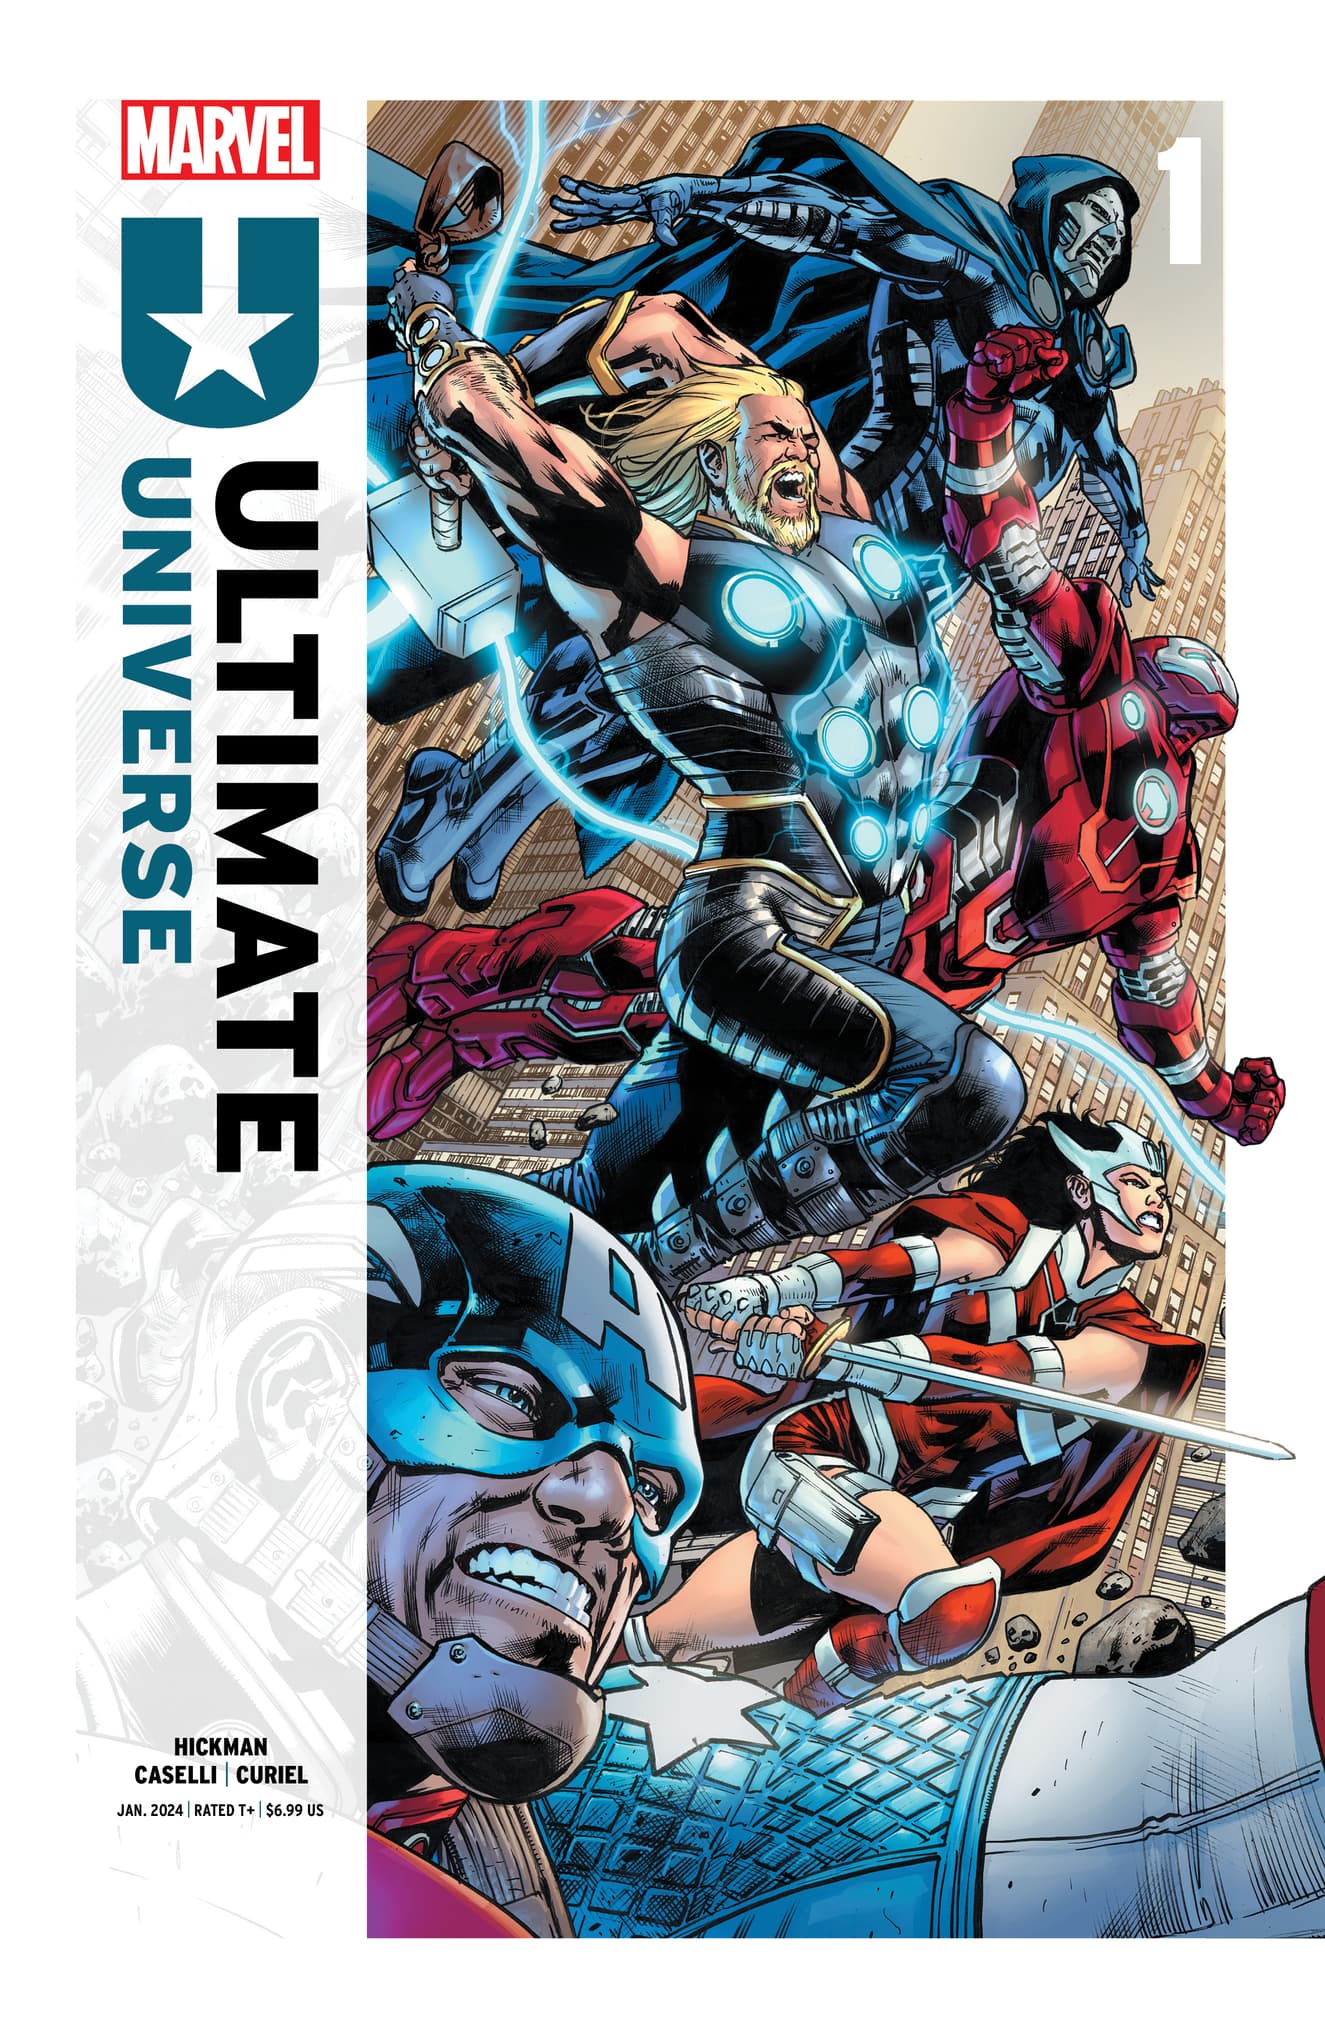 ULTIMATE UNIVERSE #1 COVER BY BRYAN HITCH